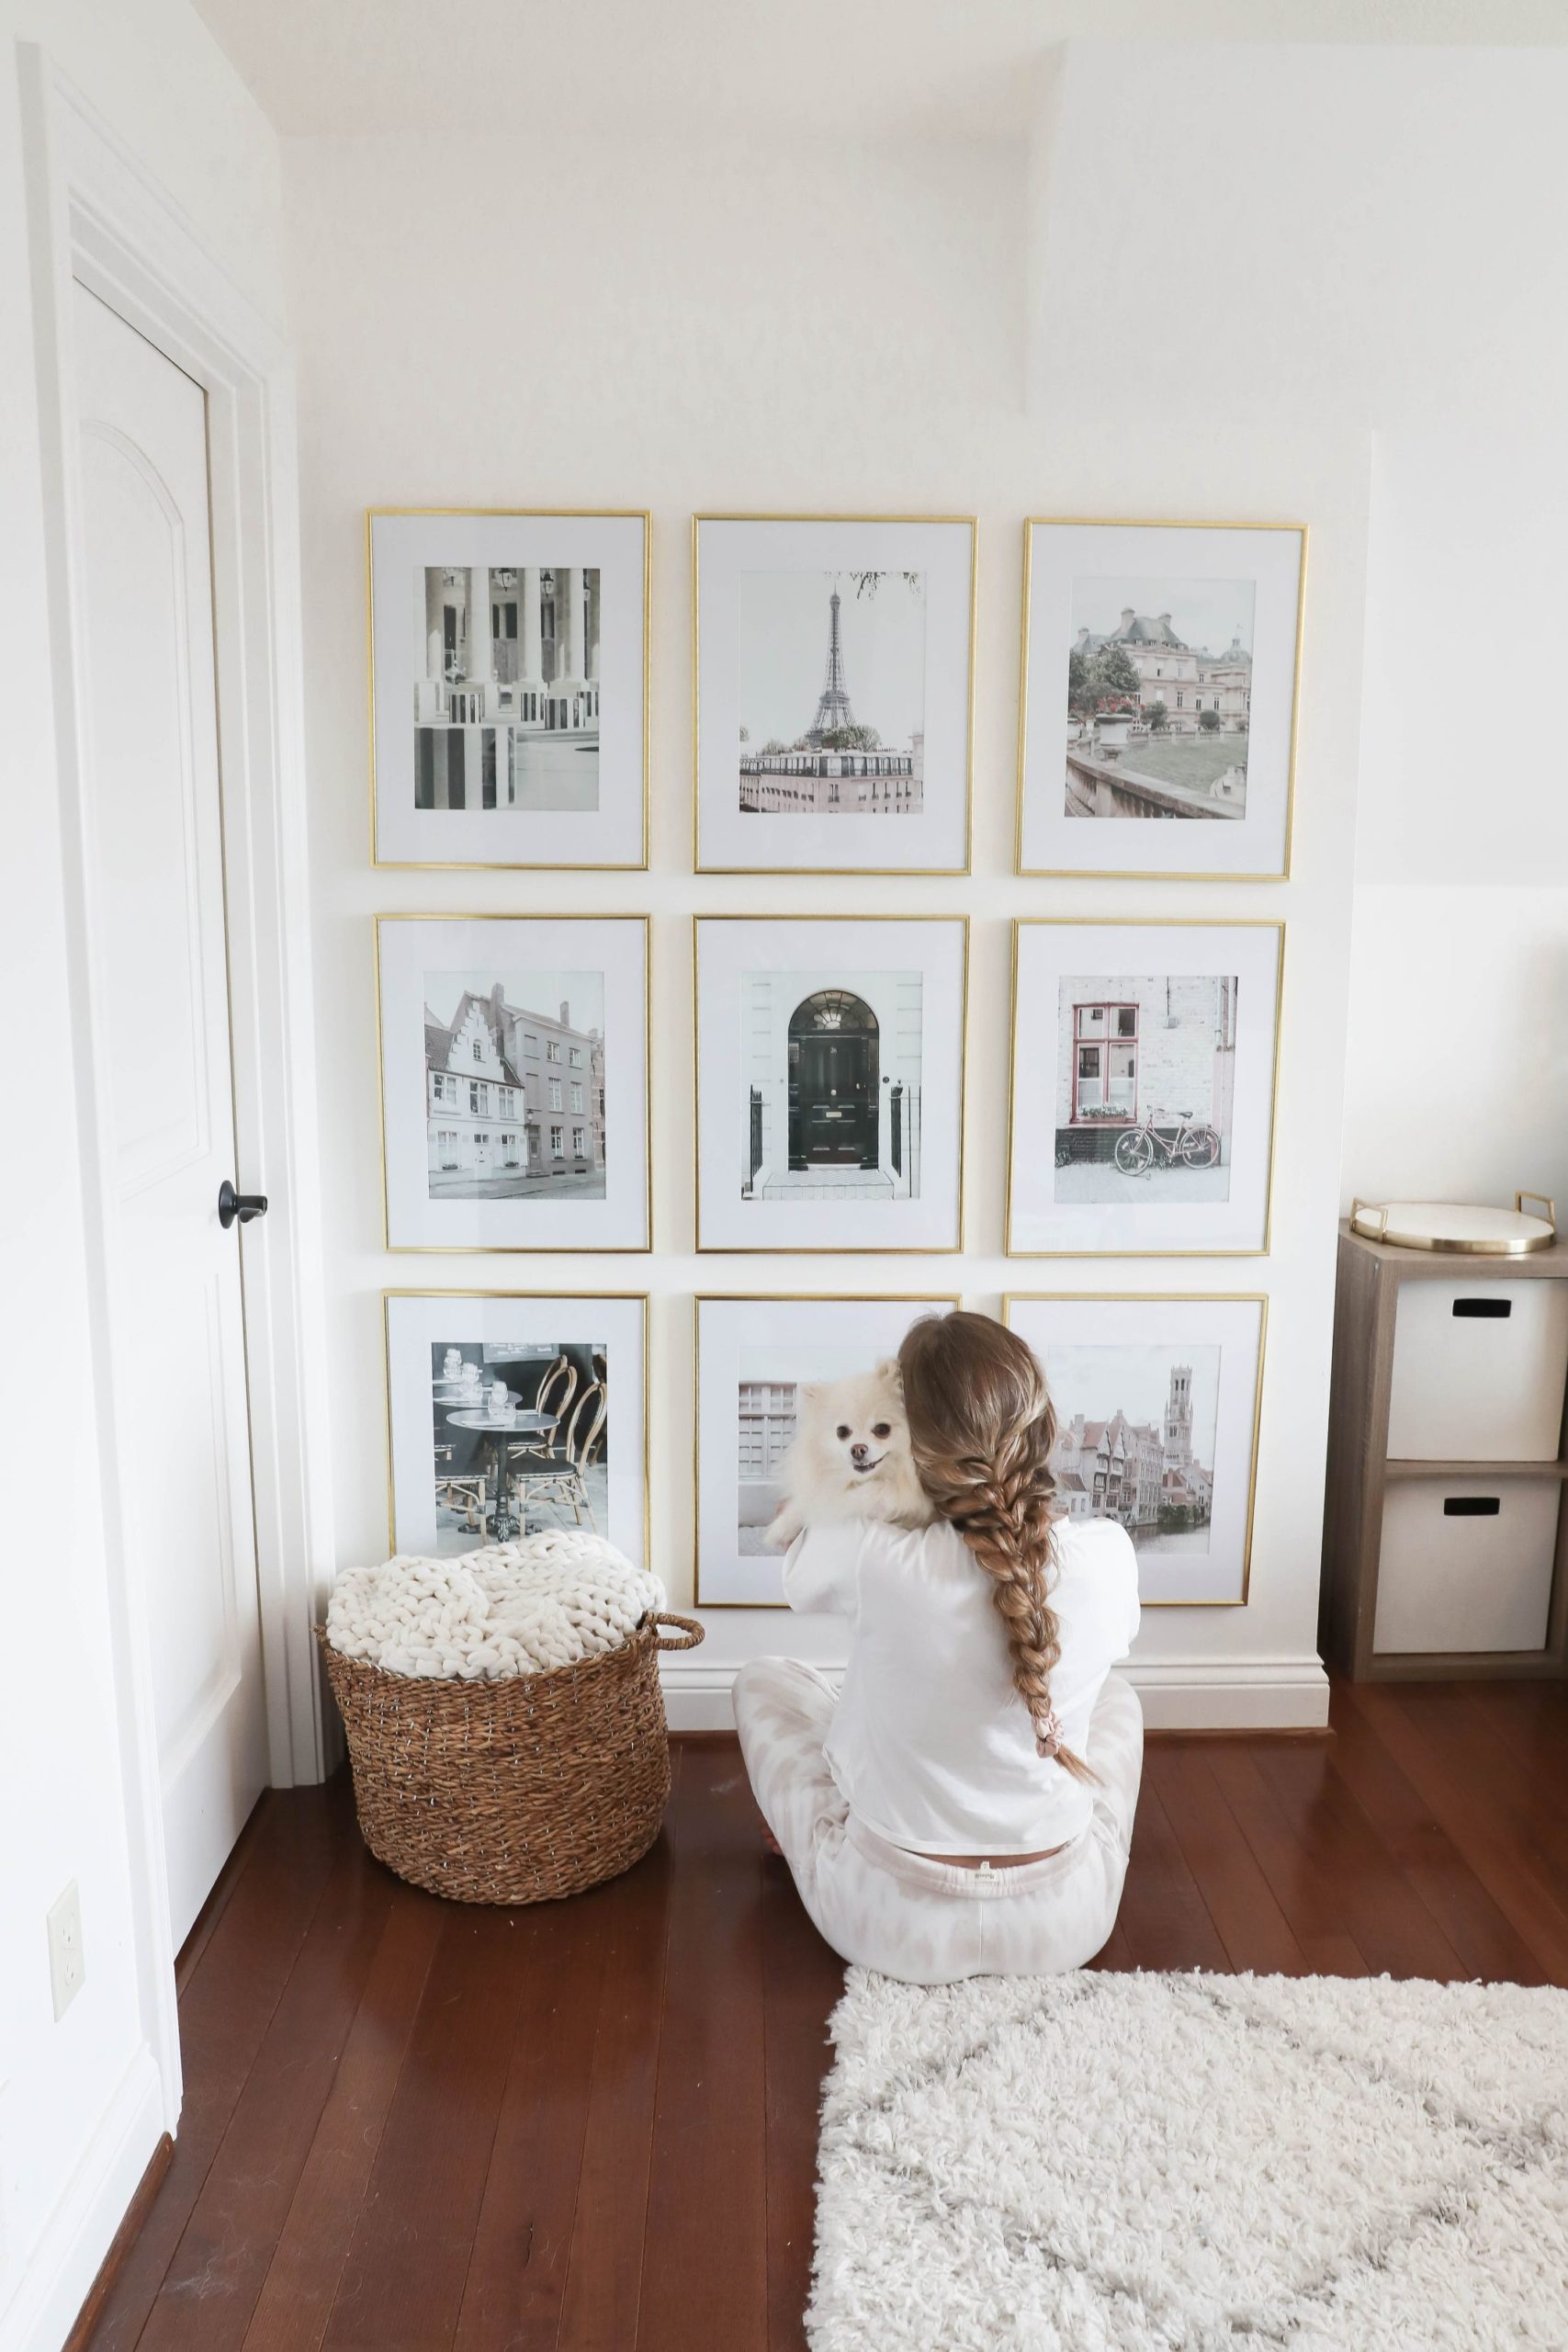 How to create the perfect gallery wall! Process from start to finish! On the blog daily dose of charm by Lauren Lindmark